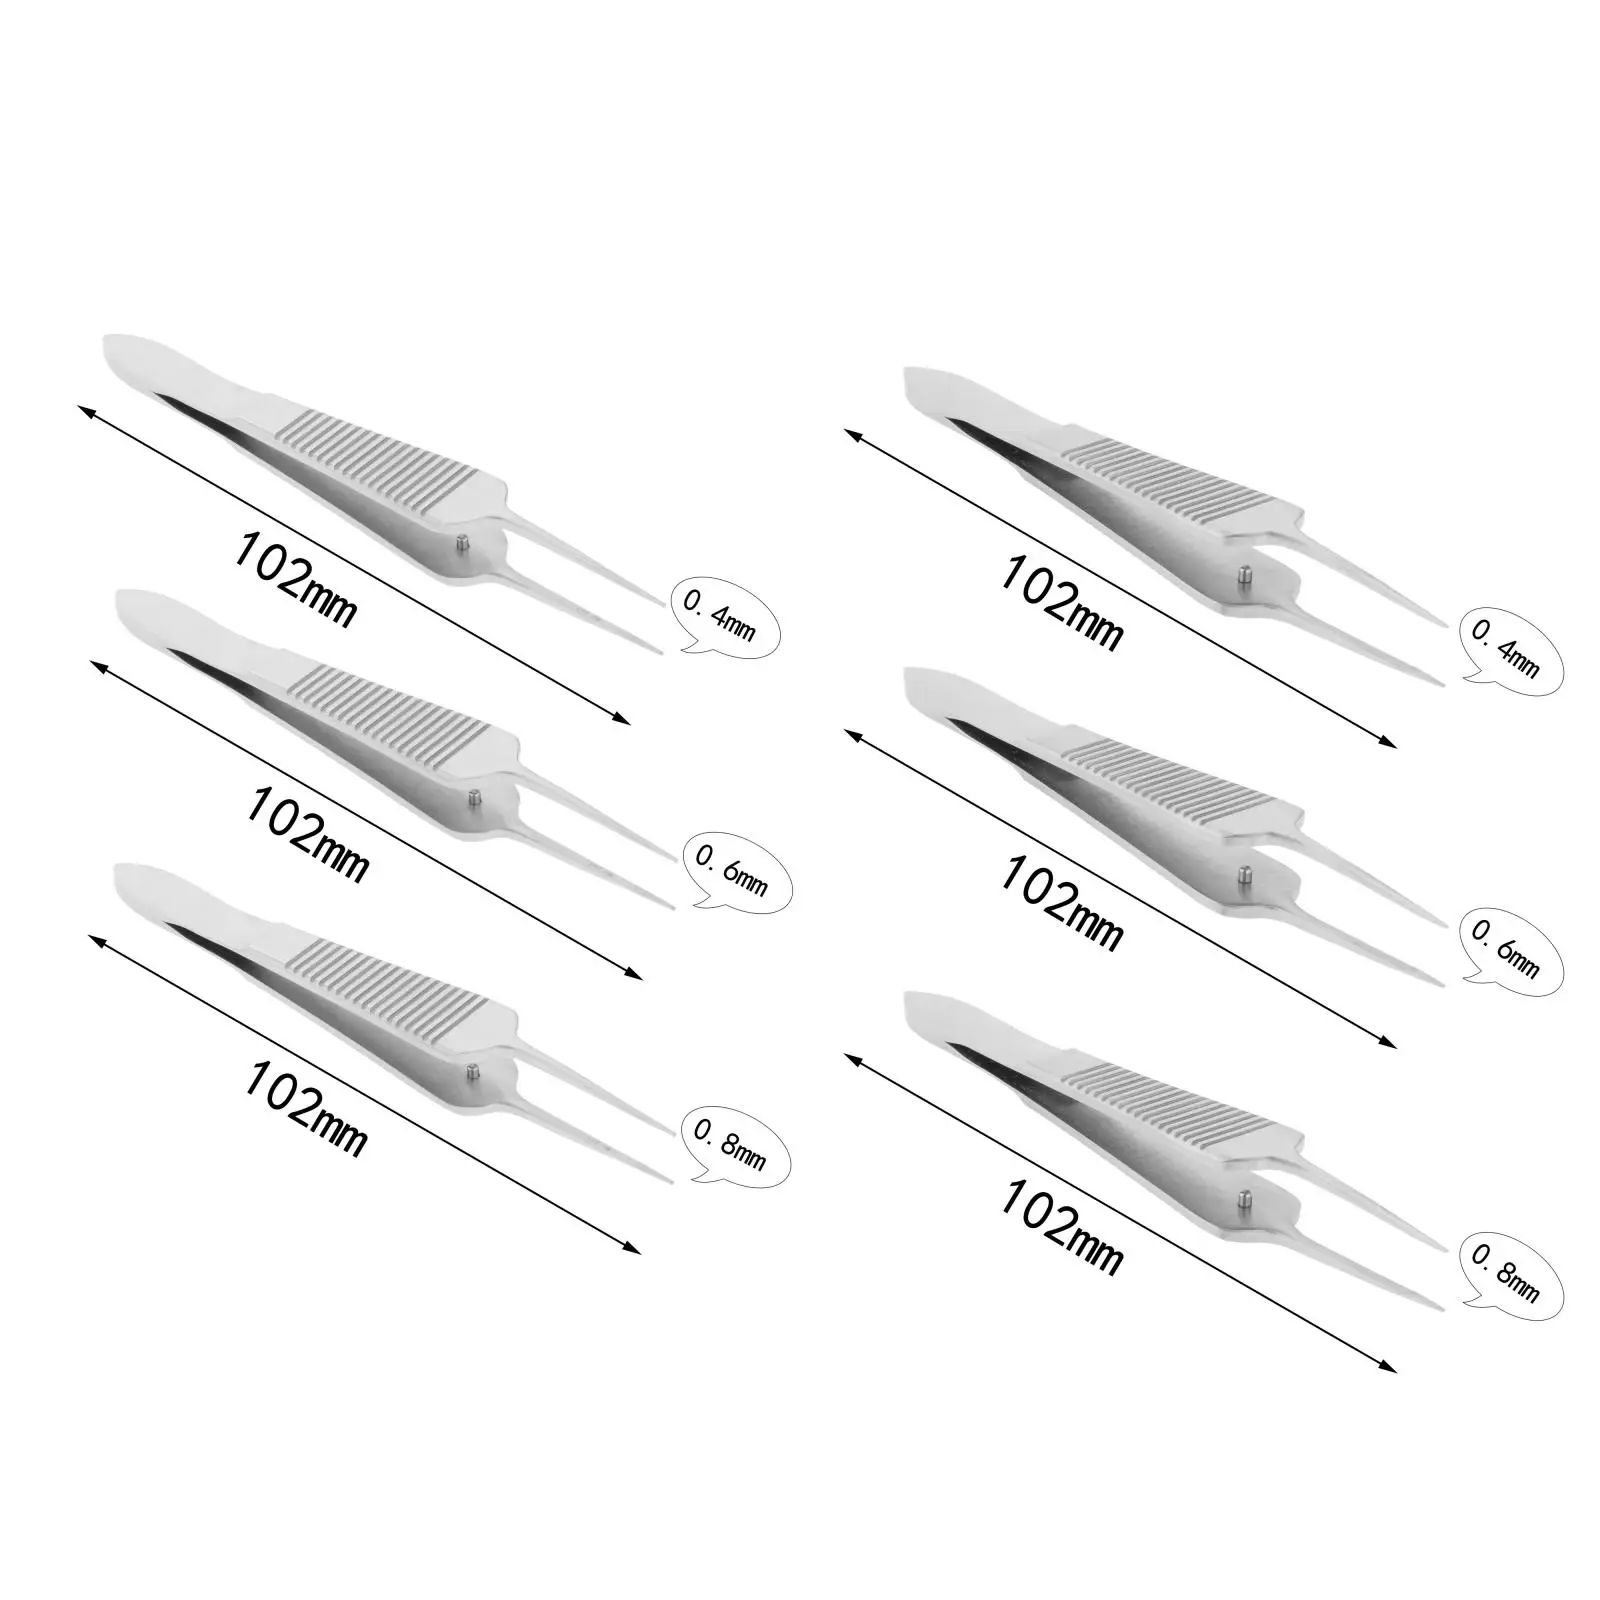 Micro Forceps Safety Use Pointed Short Tweezers for Cosmetic Surgery Hair Removal Hotel - Diameter 0.4 mm, Serrated 102mm